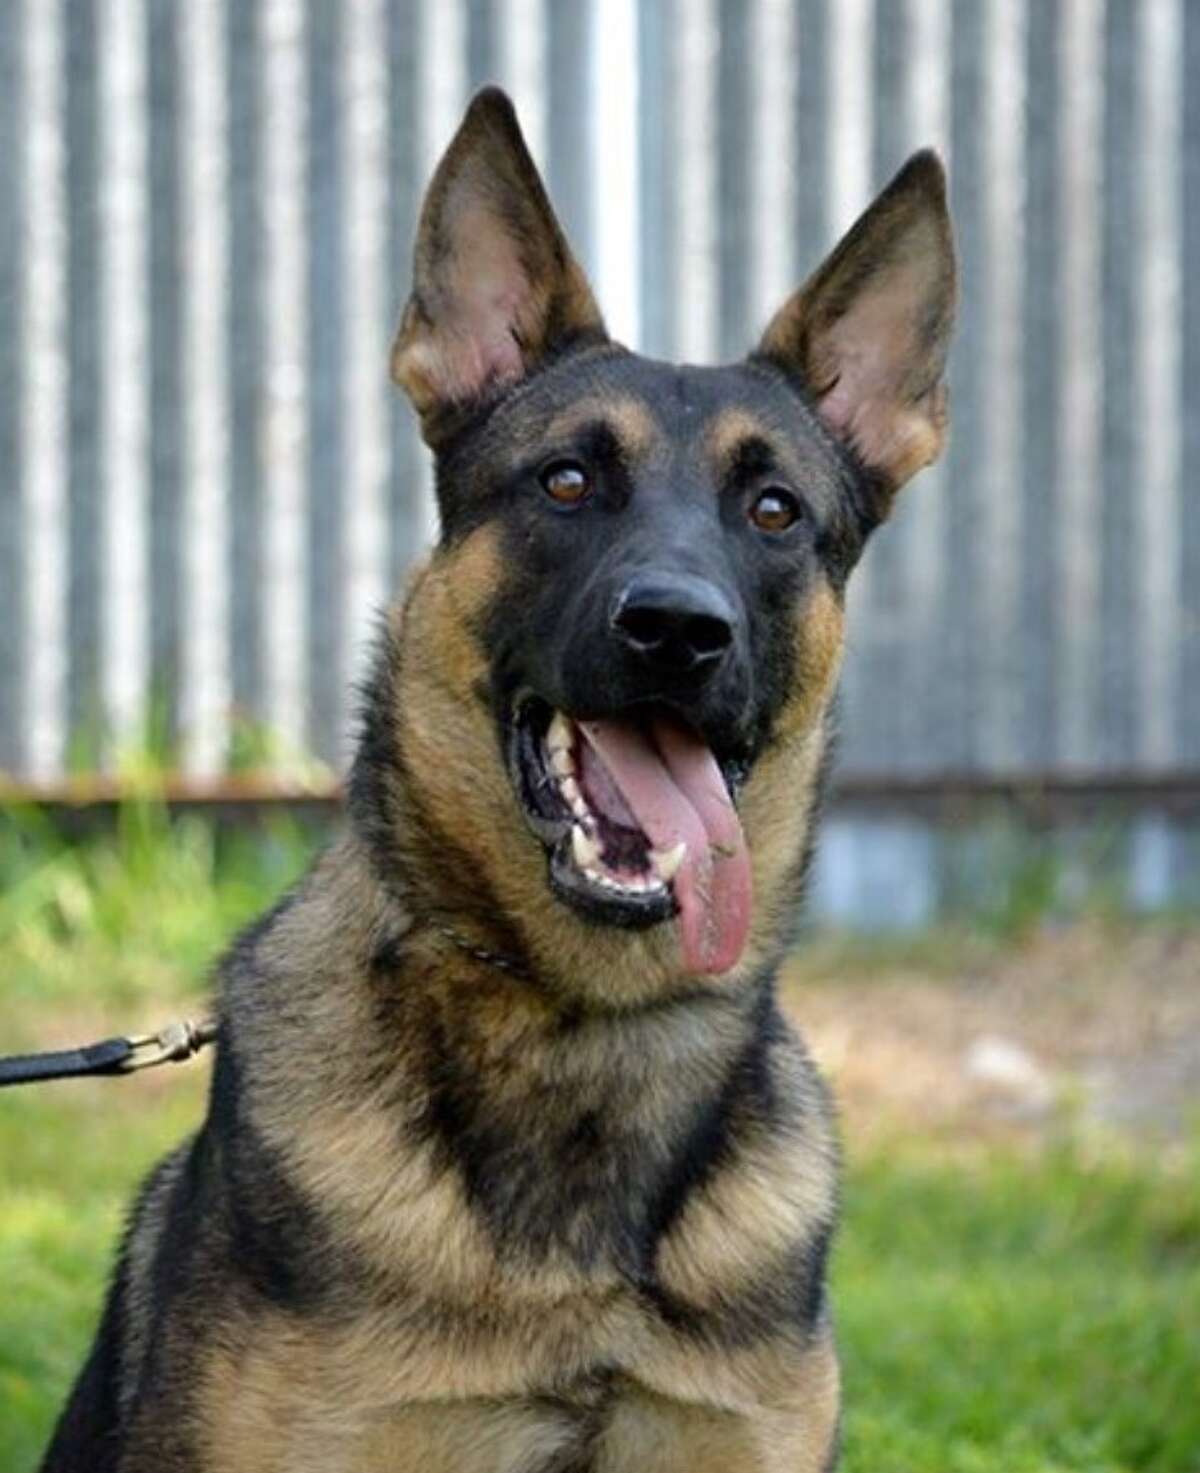 Meet the K9s of the Houston Police Department